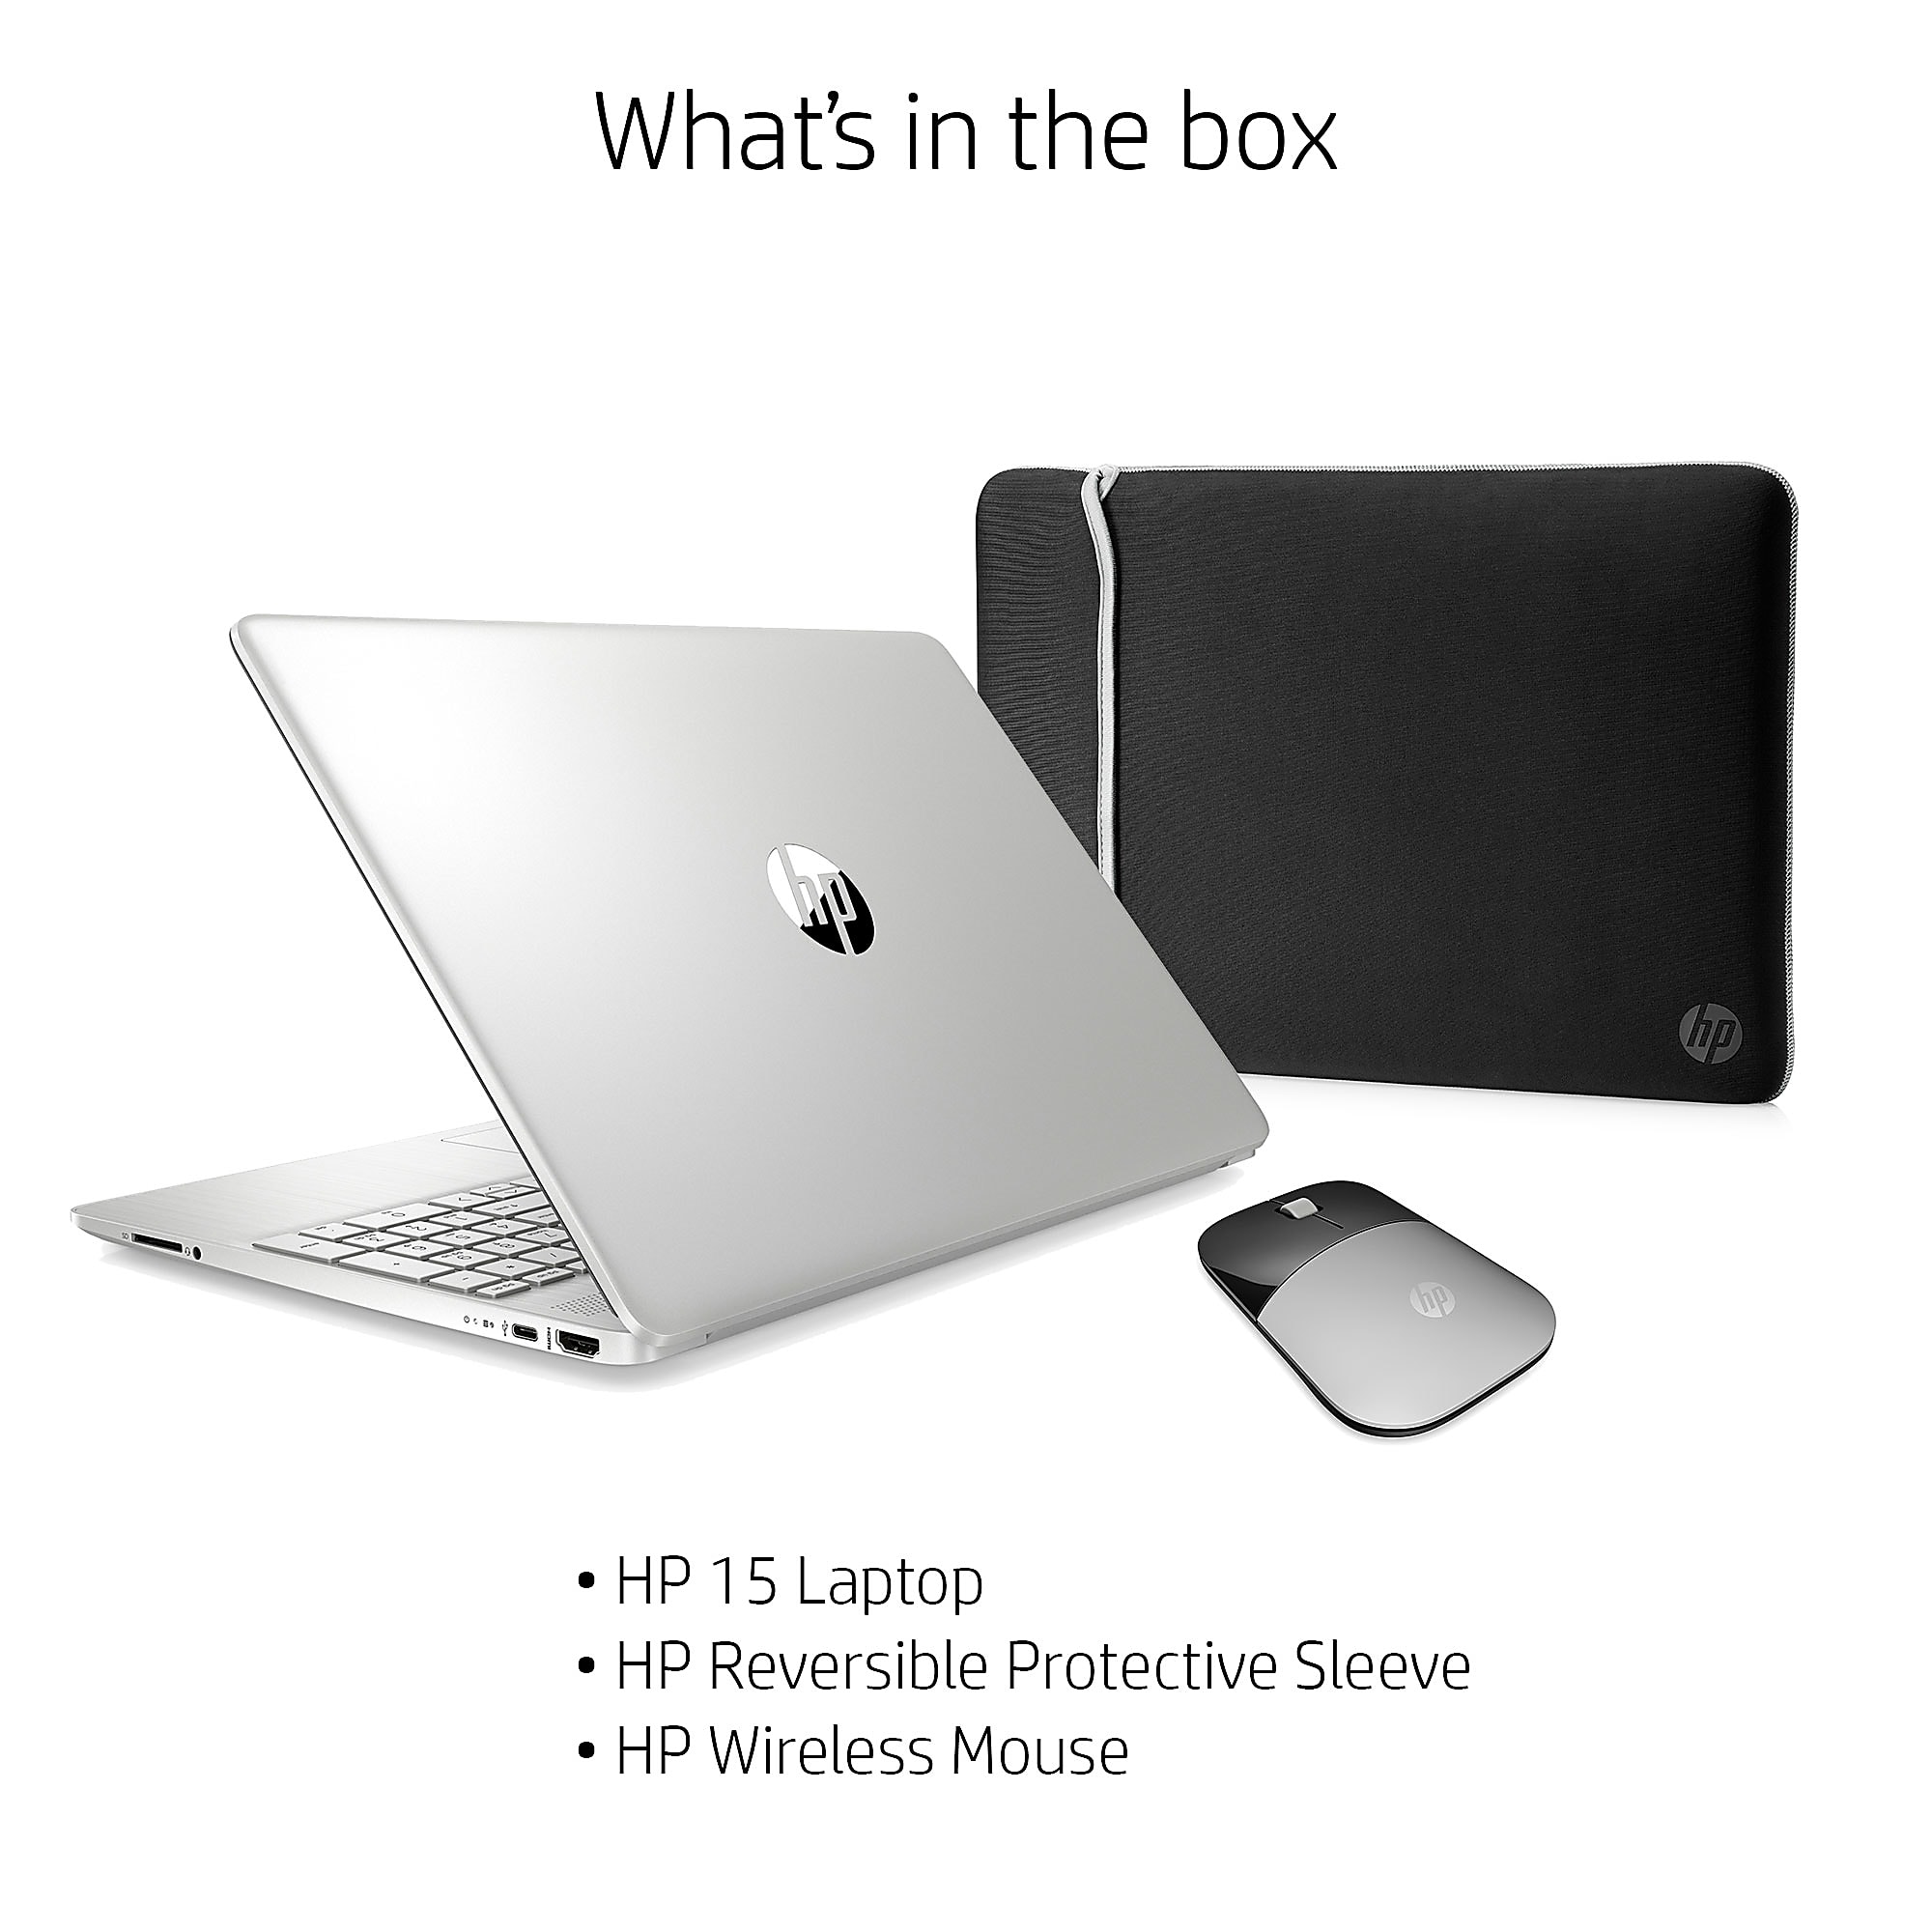 Office Depot - Deals on Laptop, Mouse, and Sleeve Bundle